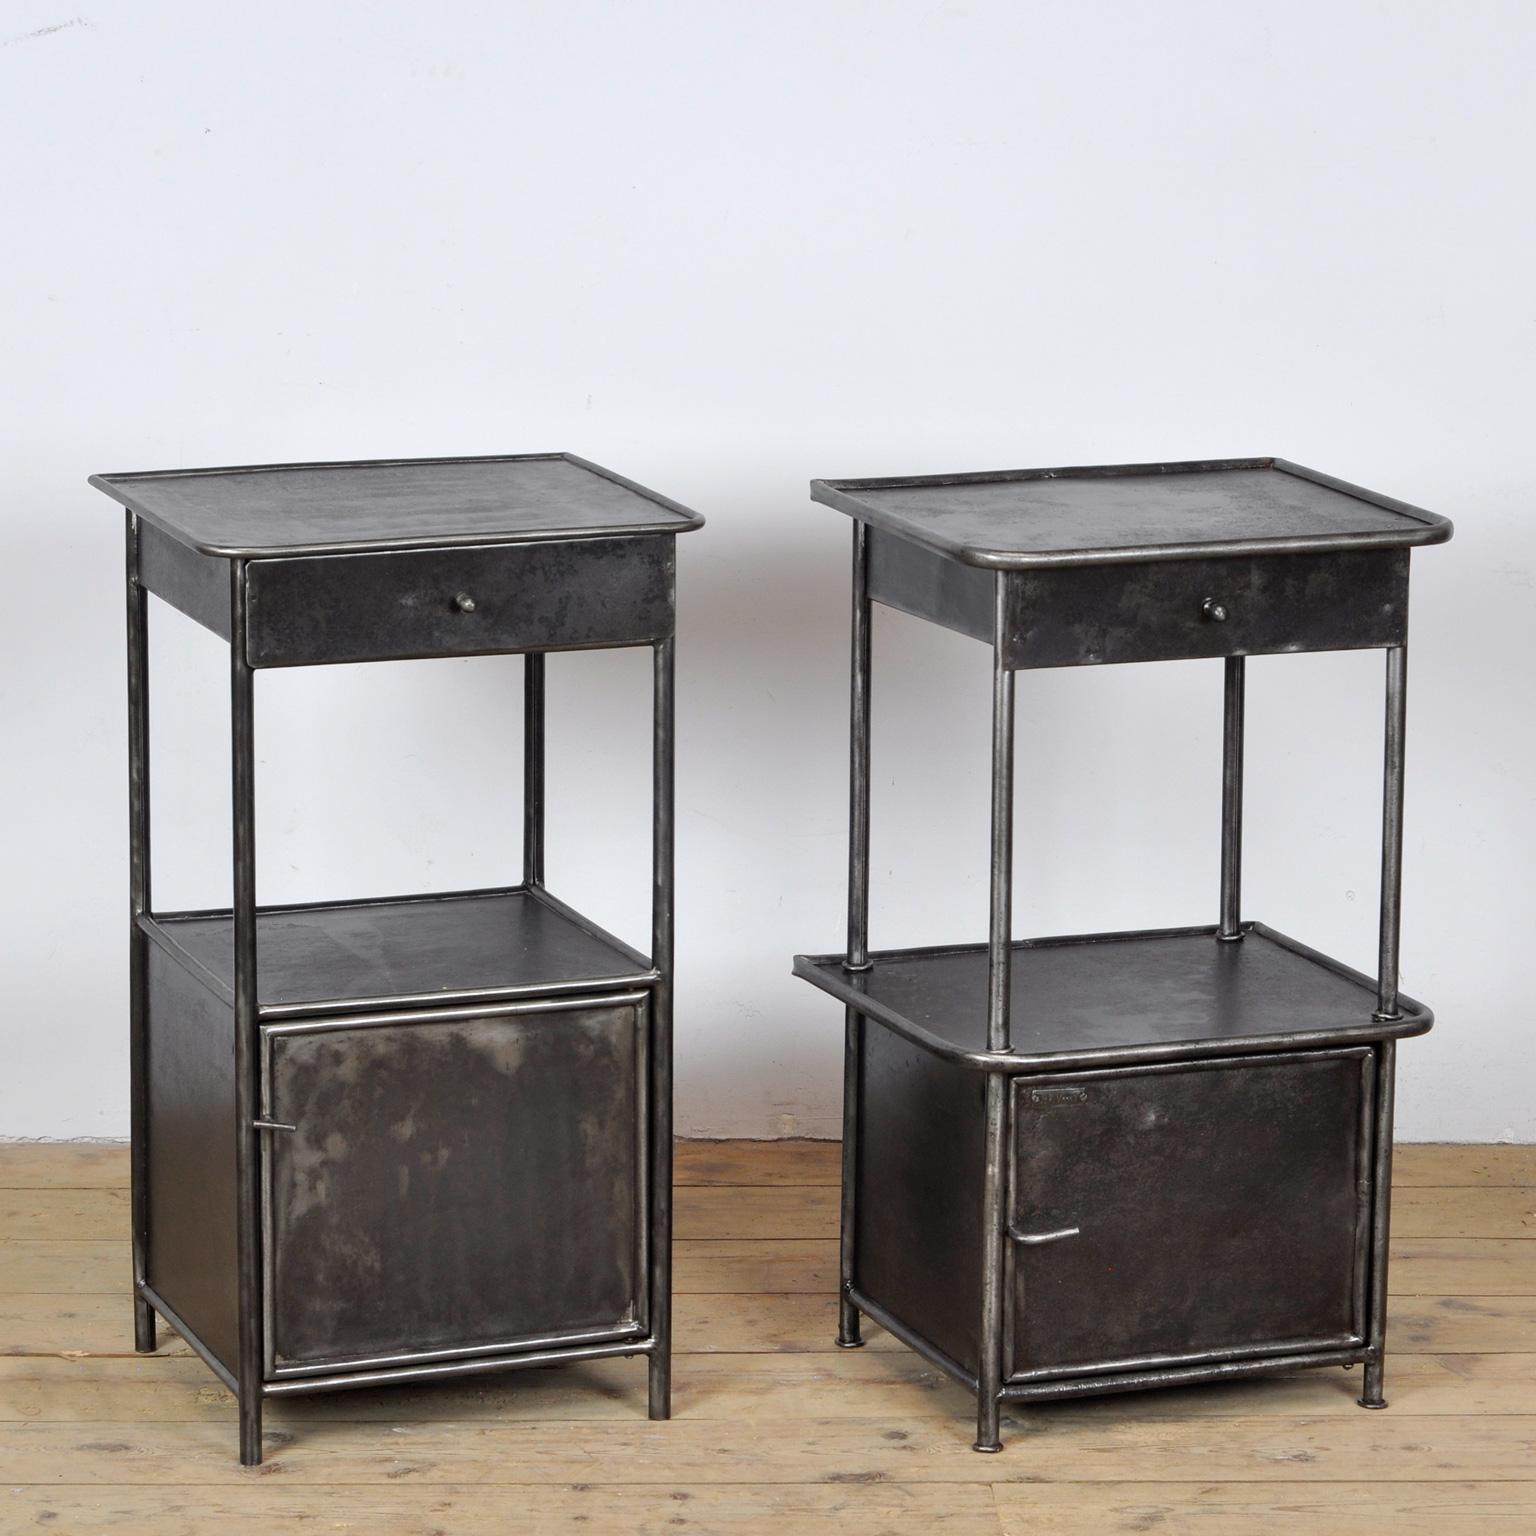 Set of iron hospital bedside tables. The items have been stripped from its paint. Treated against rust. Circa 1920.
Sold as a set but there are small differences in the nightstands.